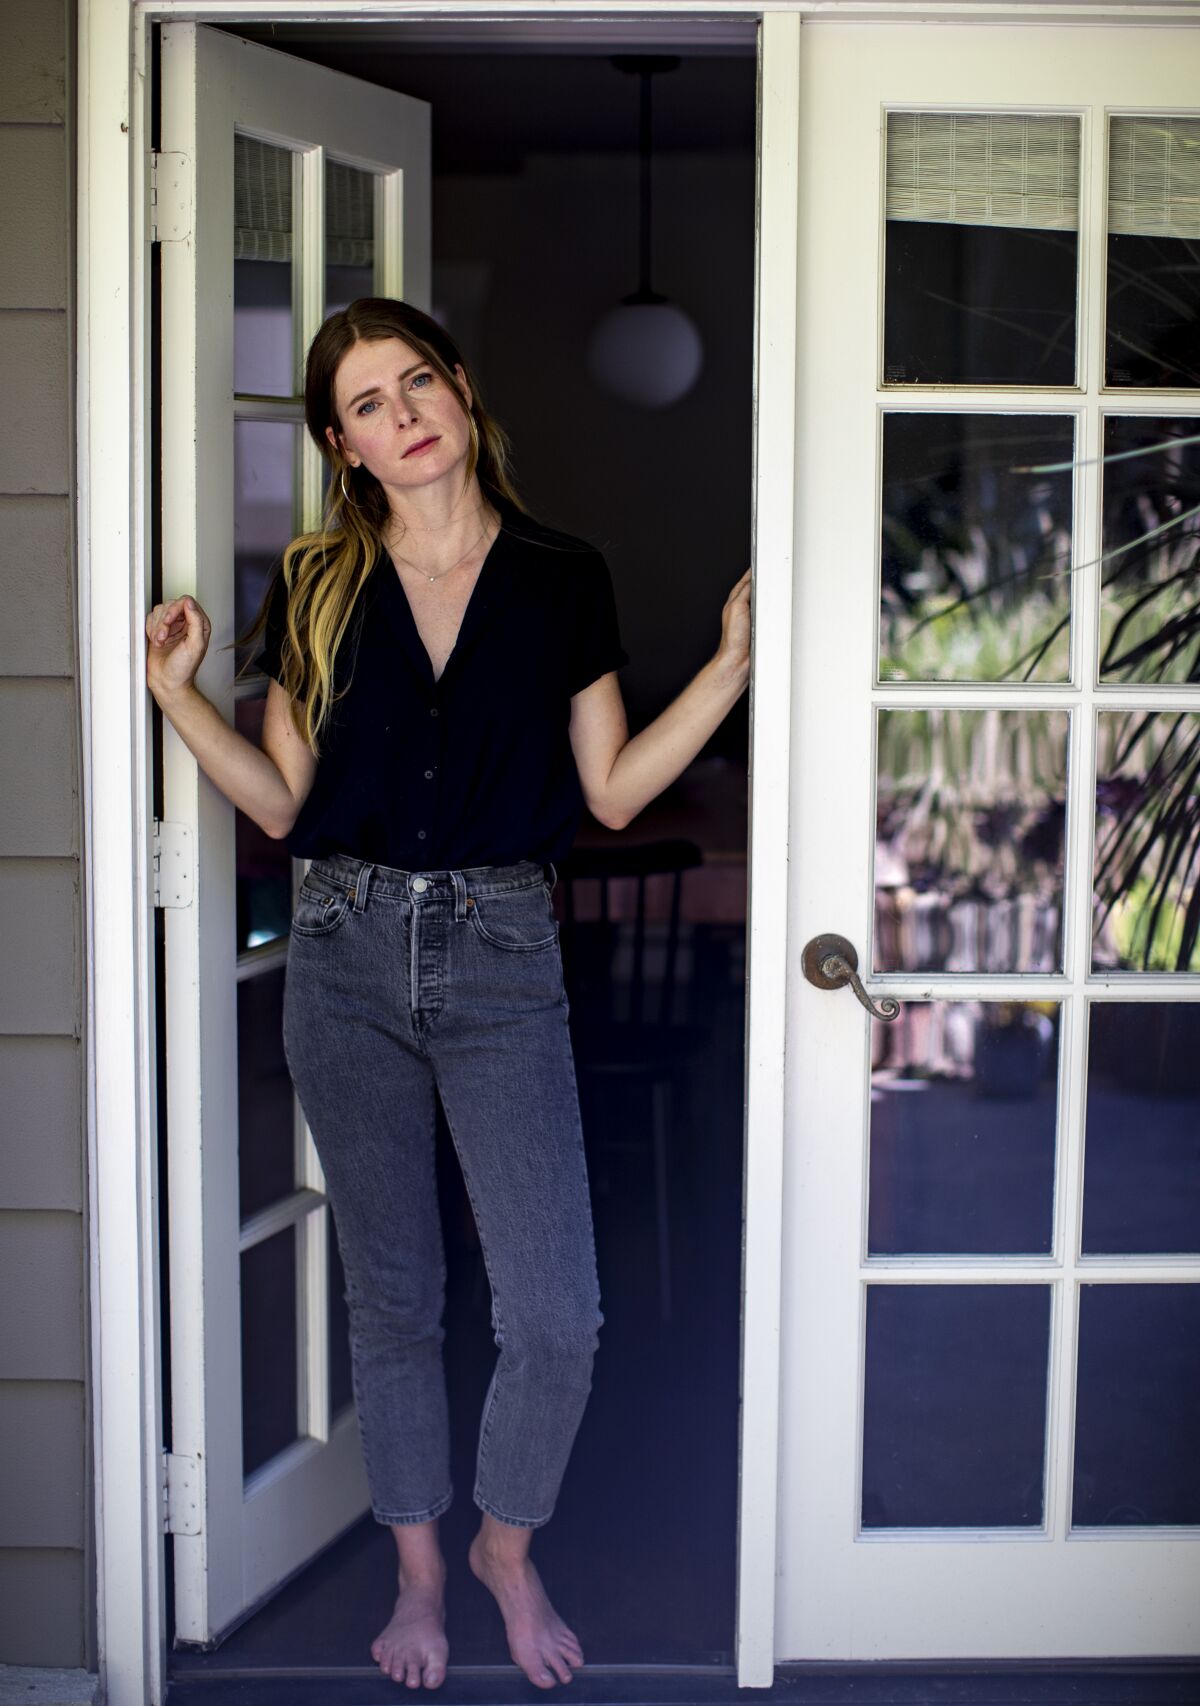 "I think fiction benefits from ambiguity," says author Emma Cline. "Whereas obviously life doesn't."